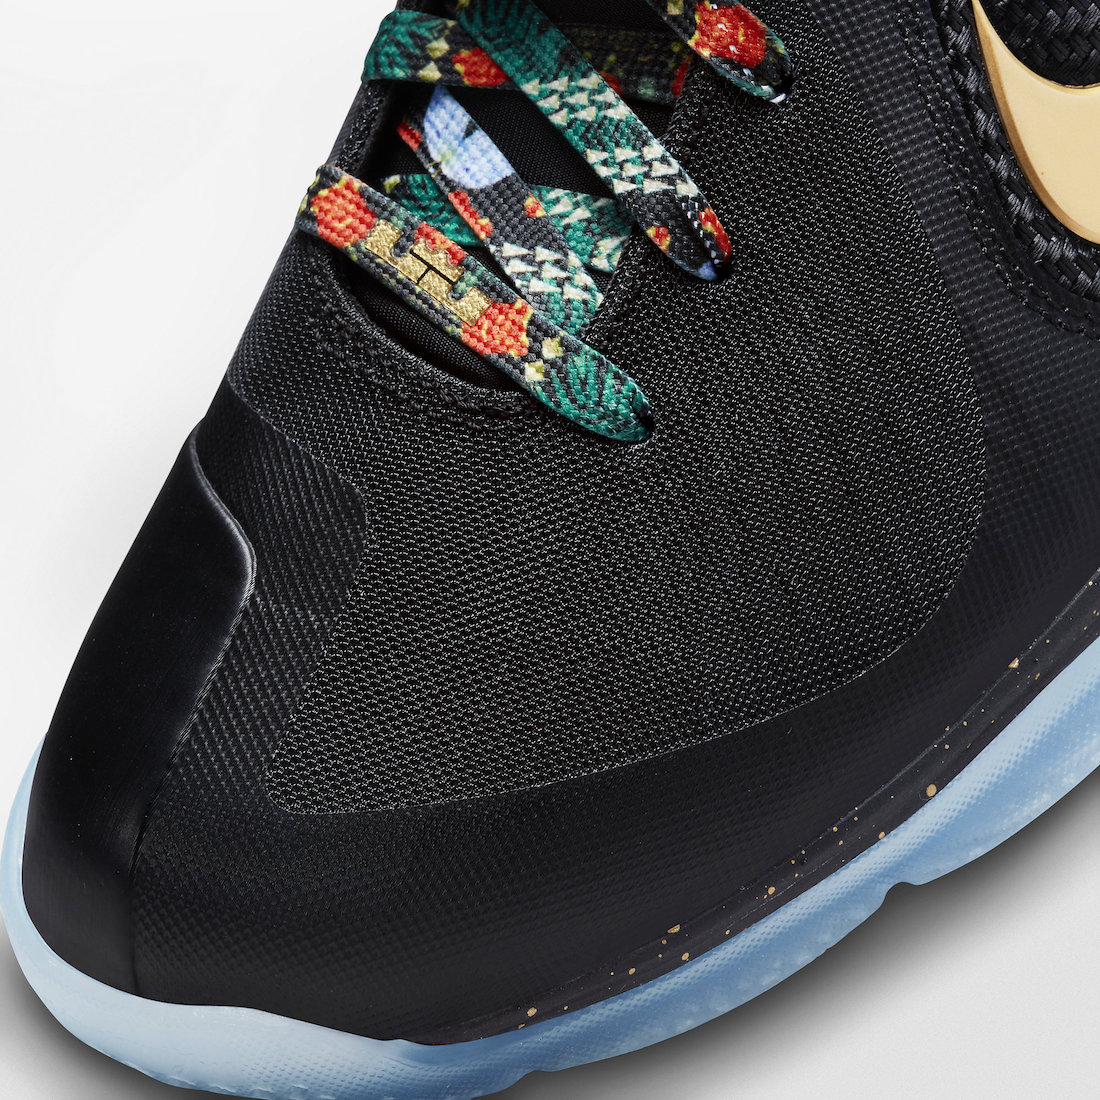 Nike-LeBron-9-Watch-The-Throne-DO9353-001-Release-Date-6